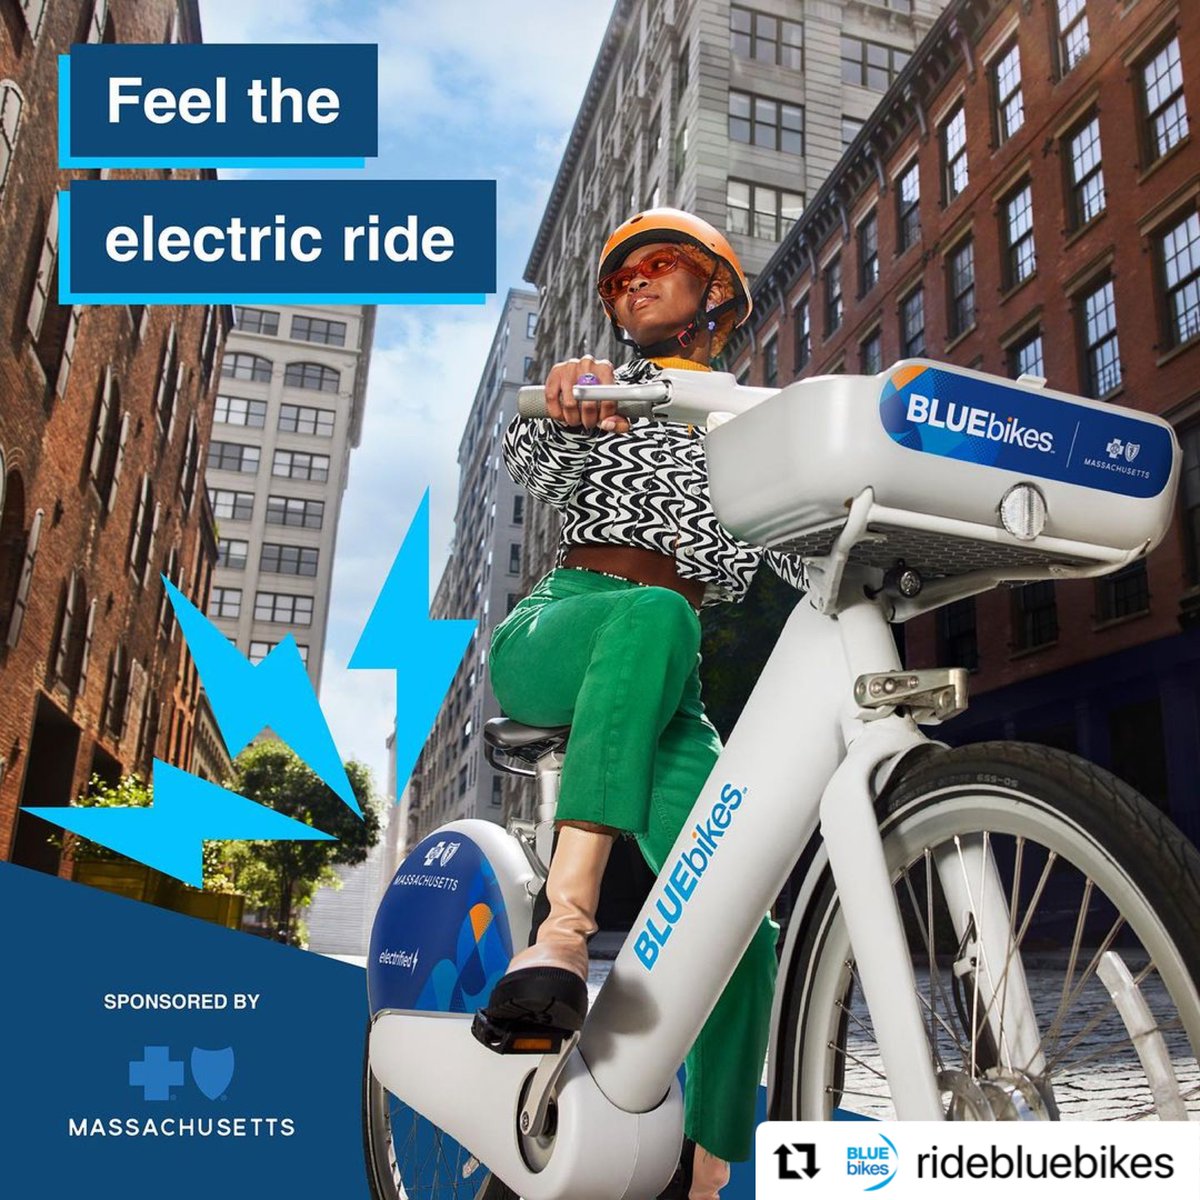 Join us in celebrating #NationalBikeMonth!Did you know that opting for a bike instead of a car can significantly reduce your carbon footprint? Let's pedal towards a greener future with #SustainableTransportation options like @RideBluebikes and ebikes.